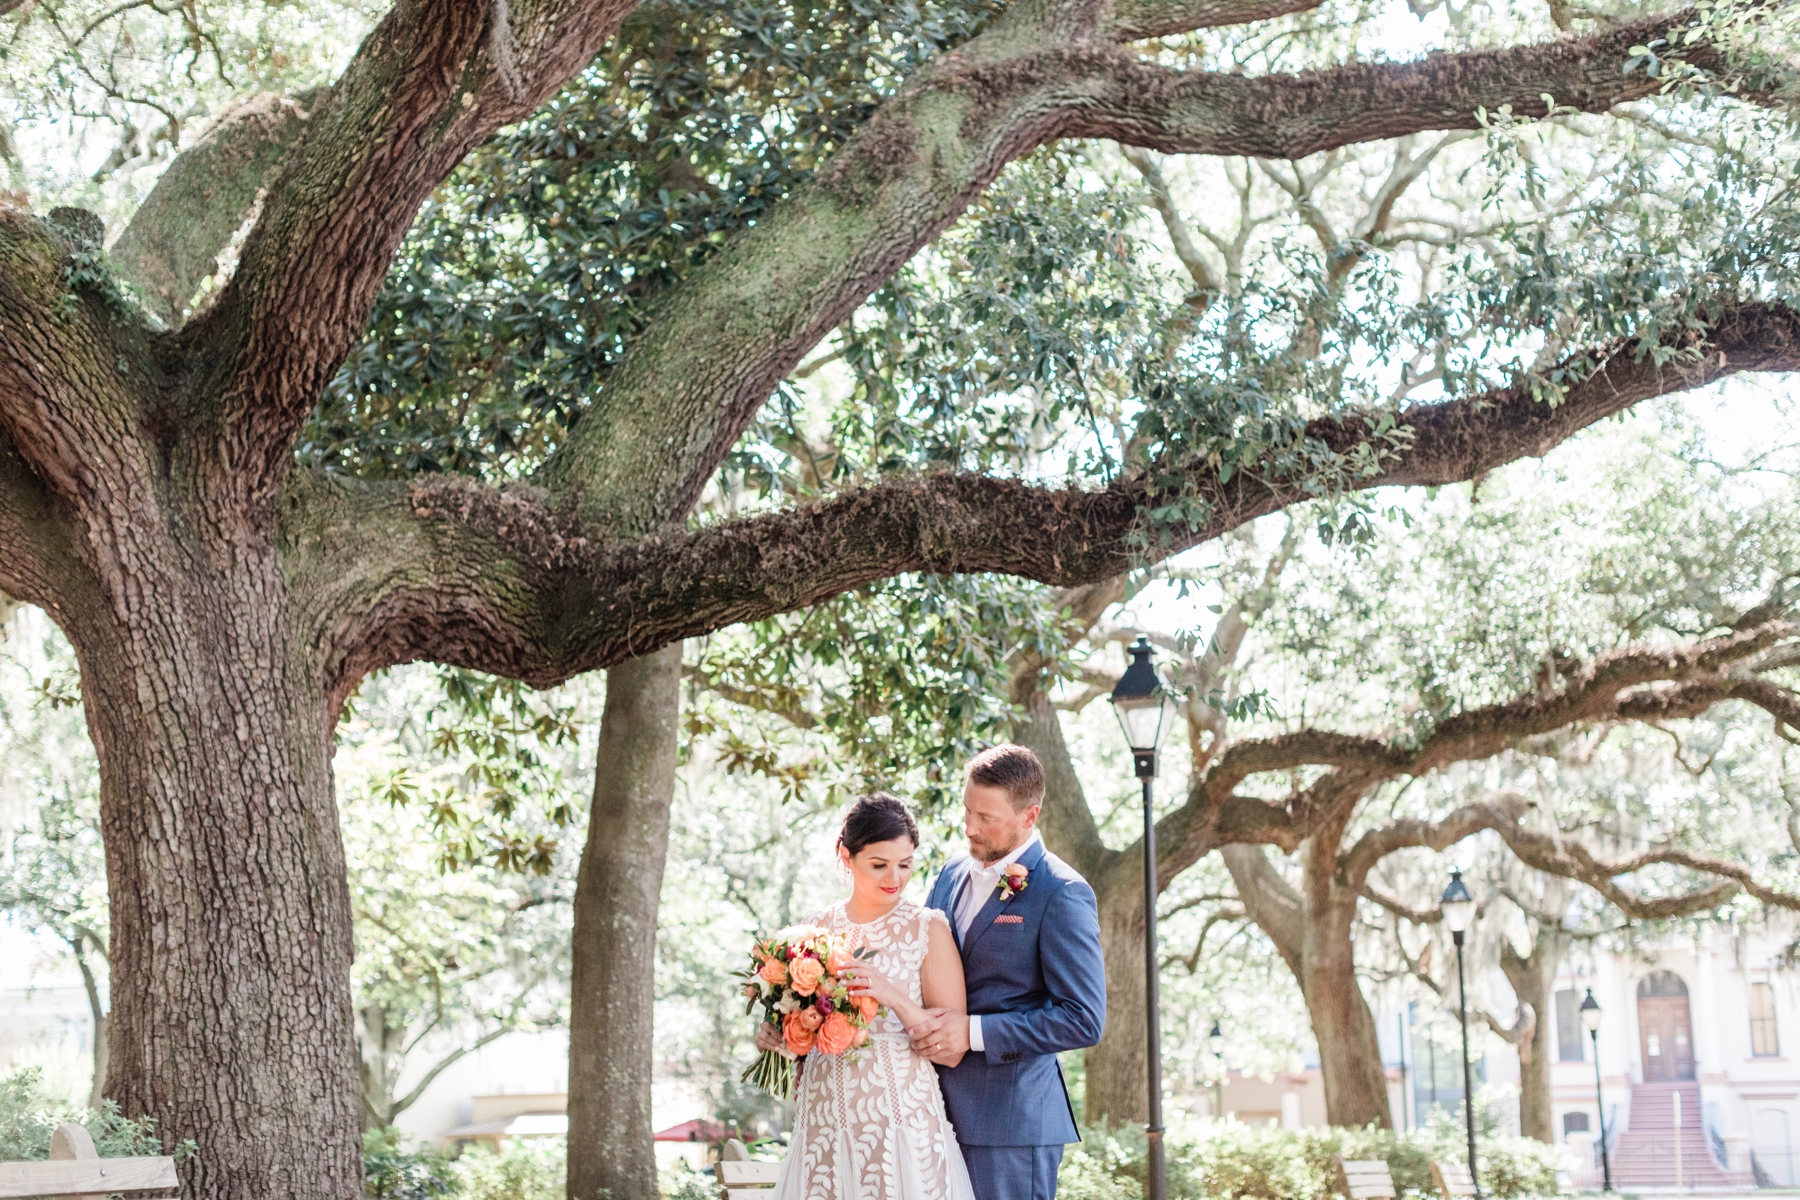 Orange, blush, and navy elopement bouquet by Ivory and Beau